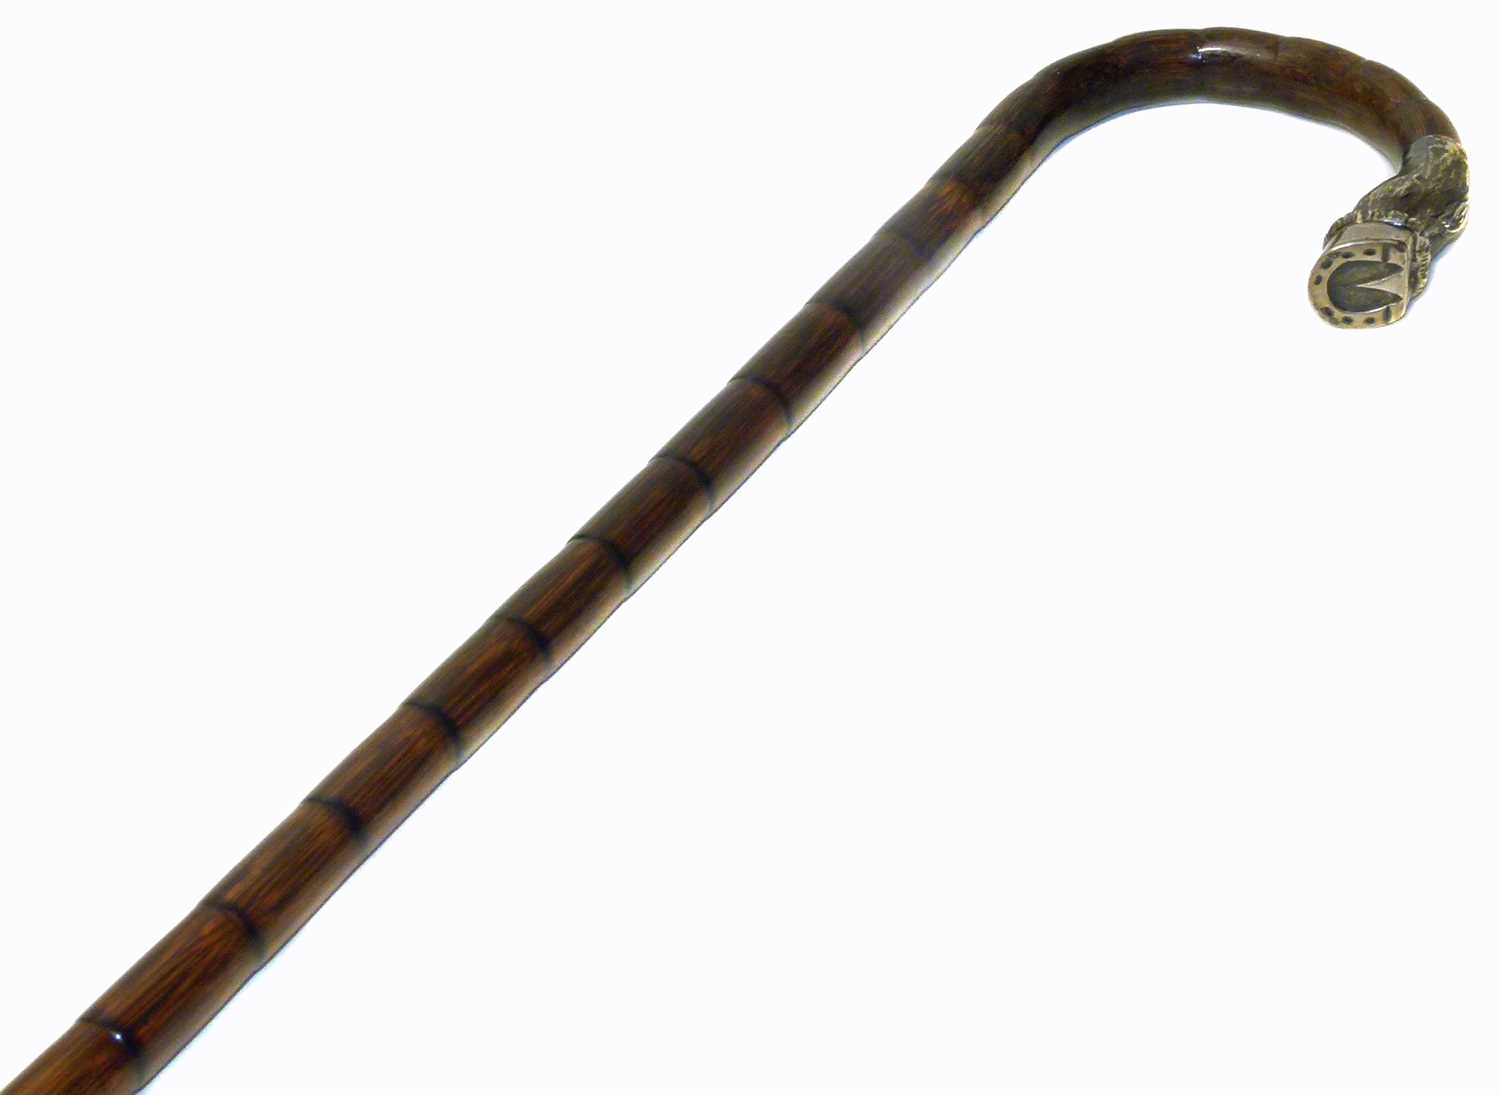 Stained bamboo walking cane.